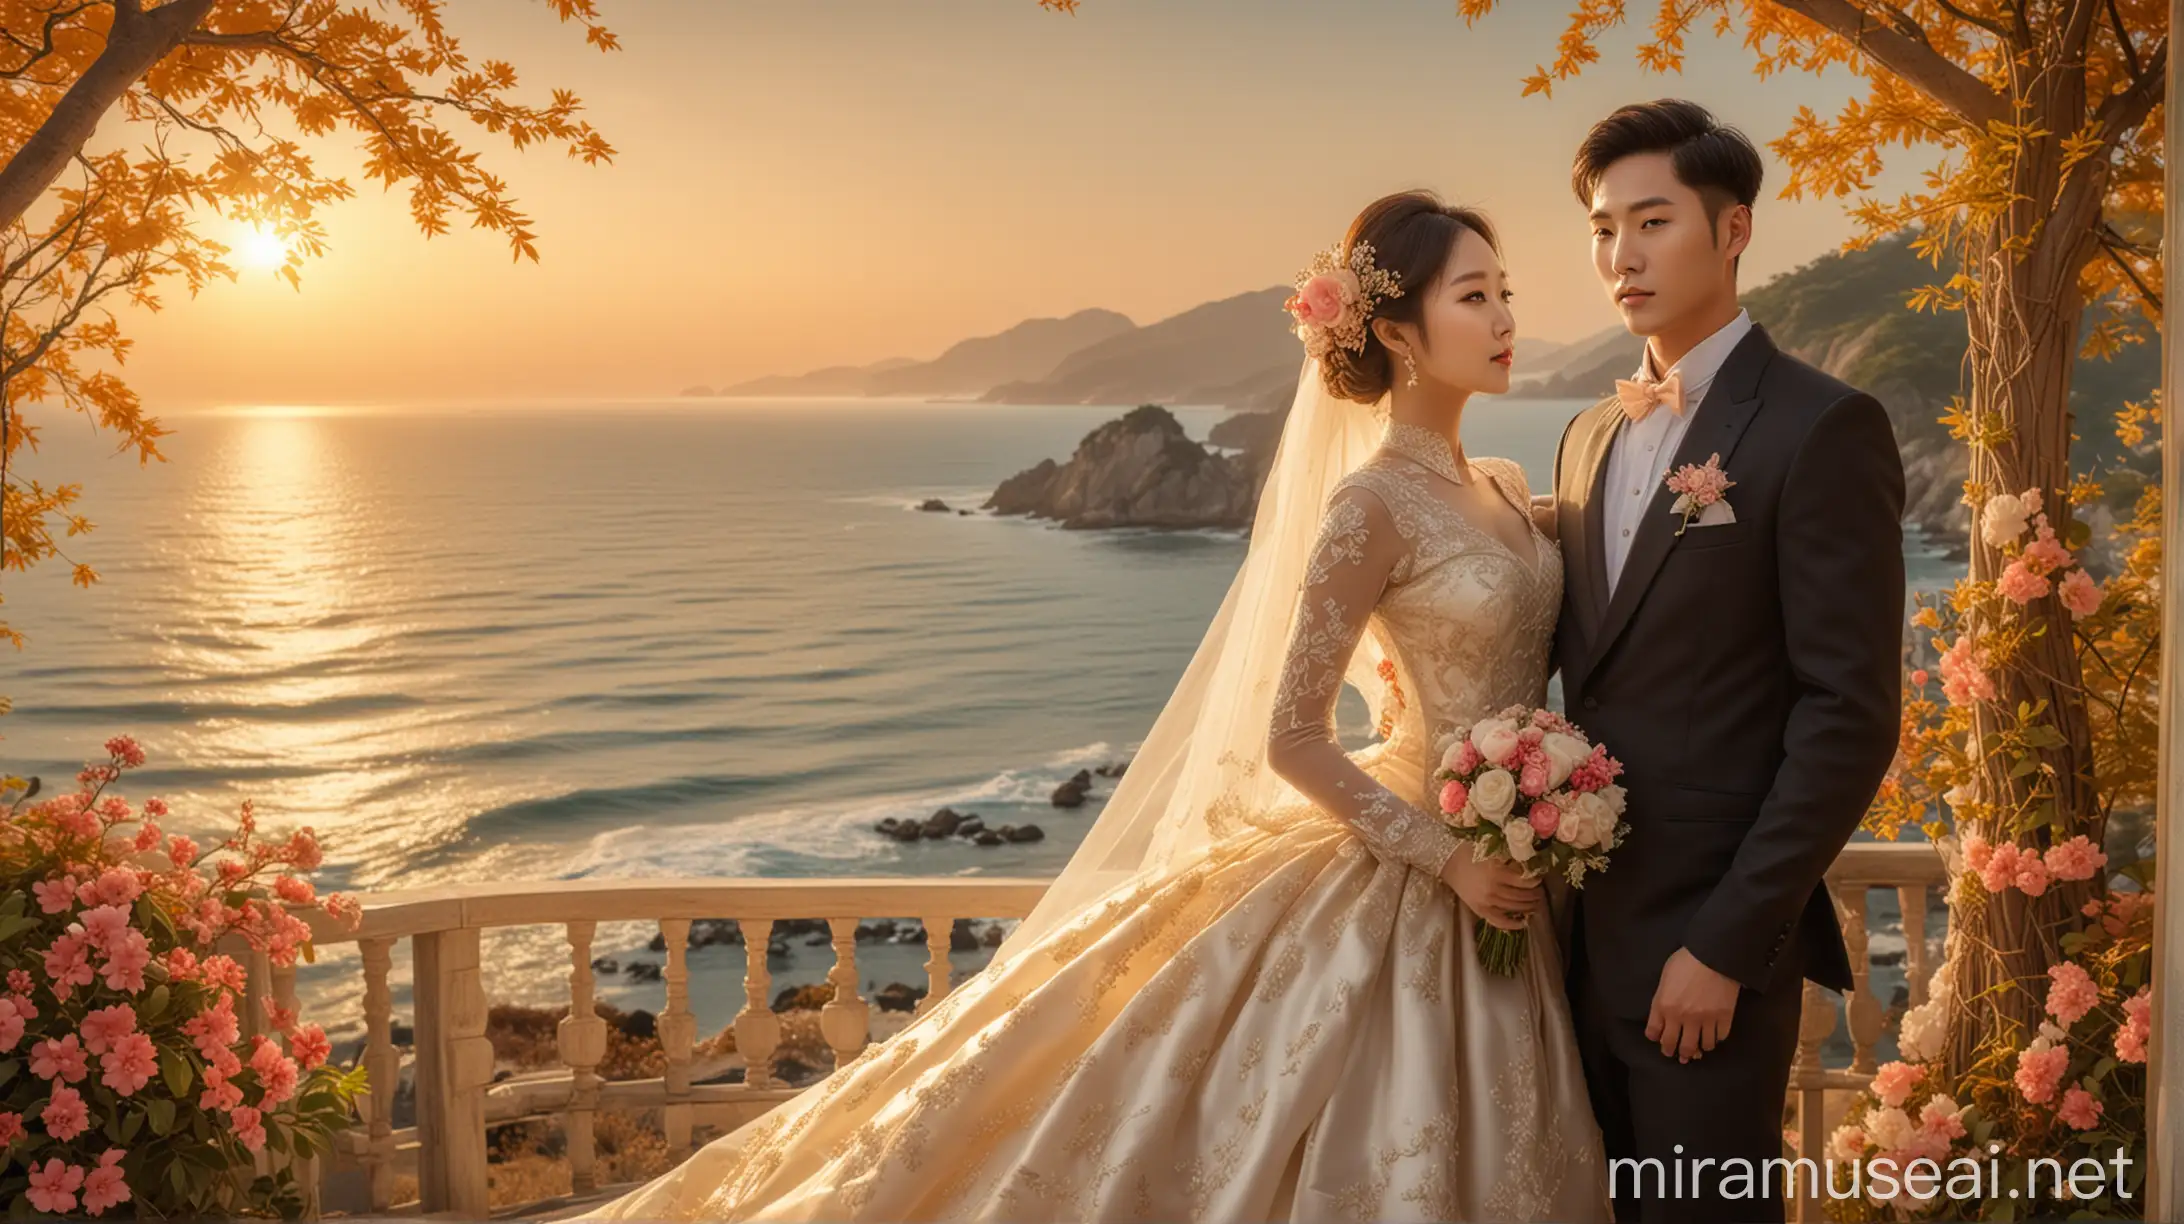 Stunning Korean Bride and Groom Pose Serenely by the Sea